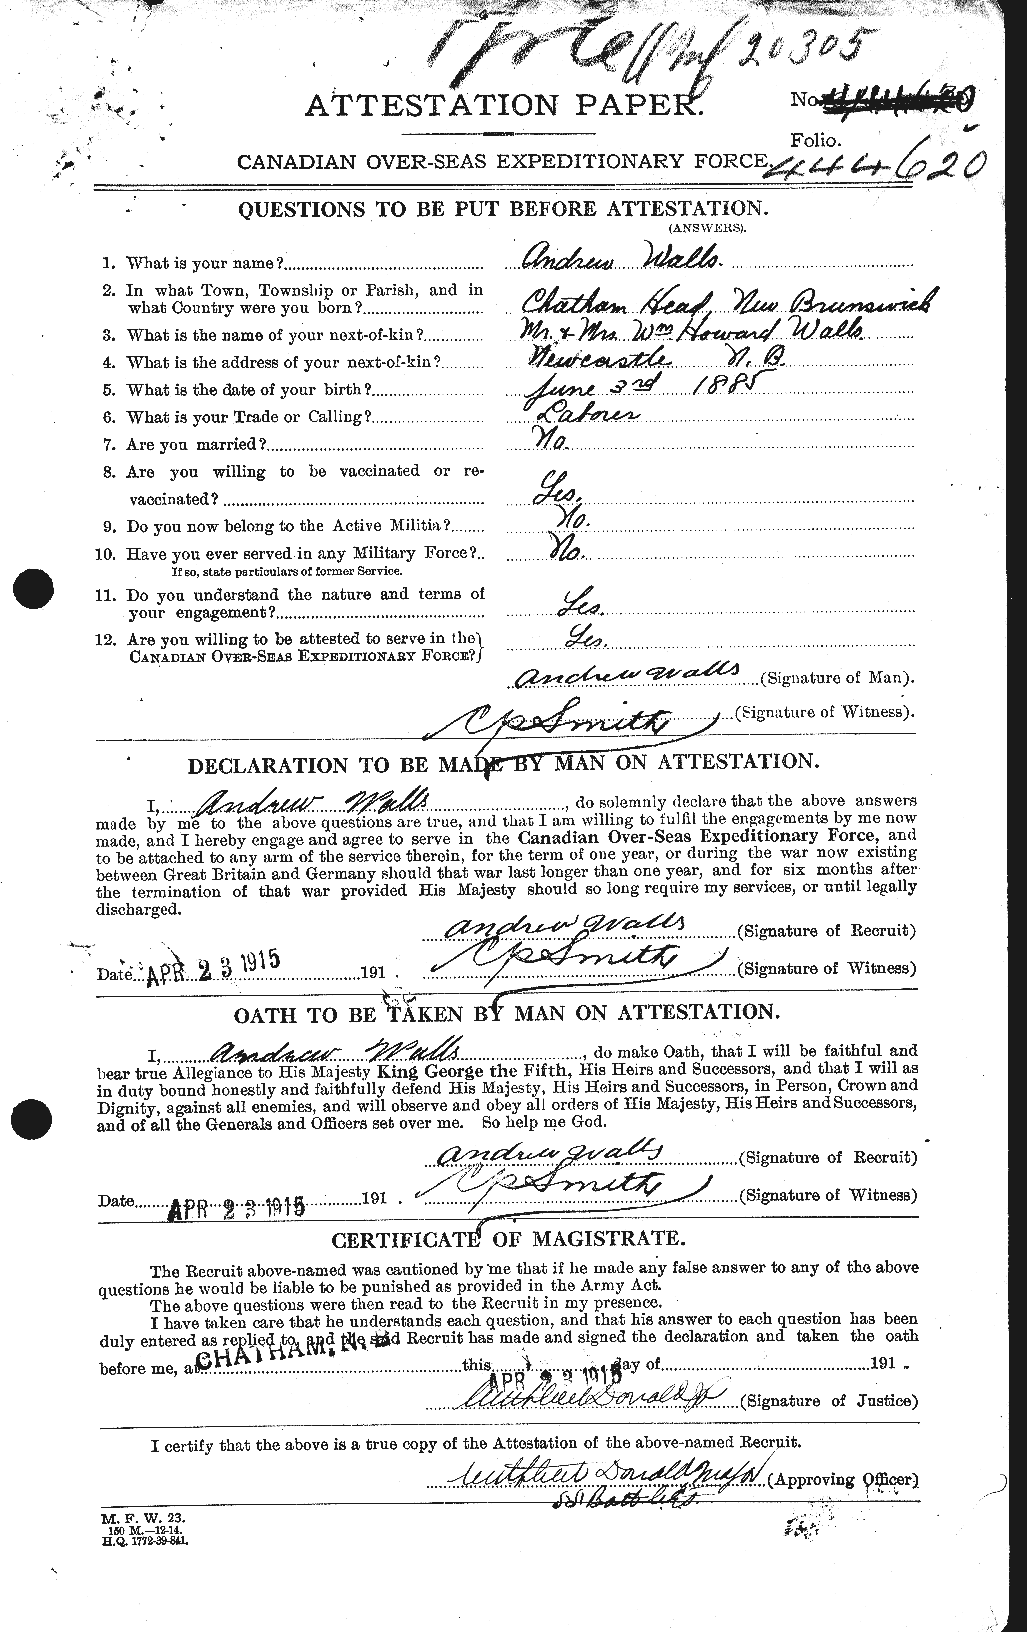 Personnel Records of the First World War - CEF 667026a